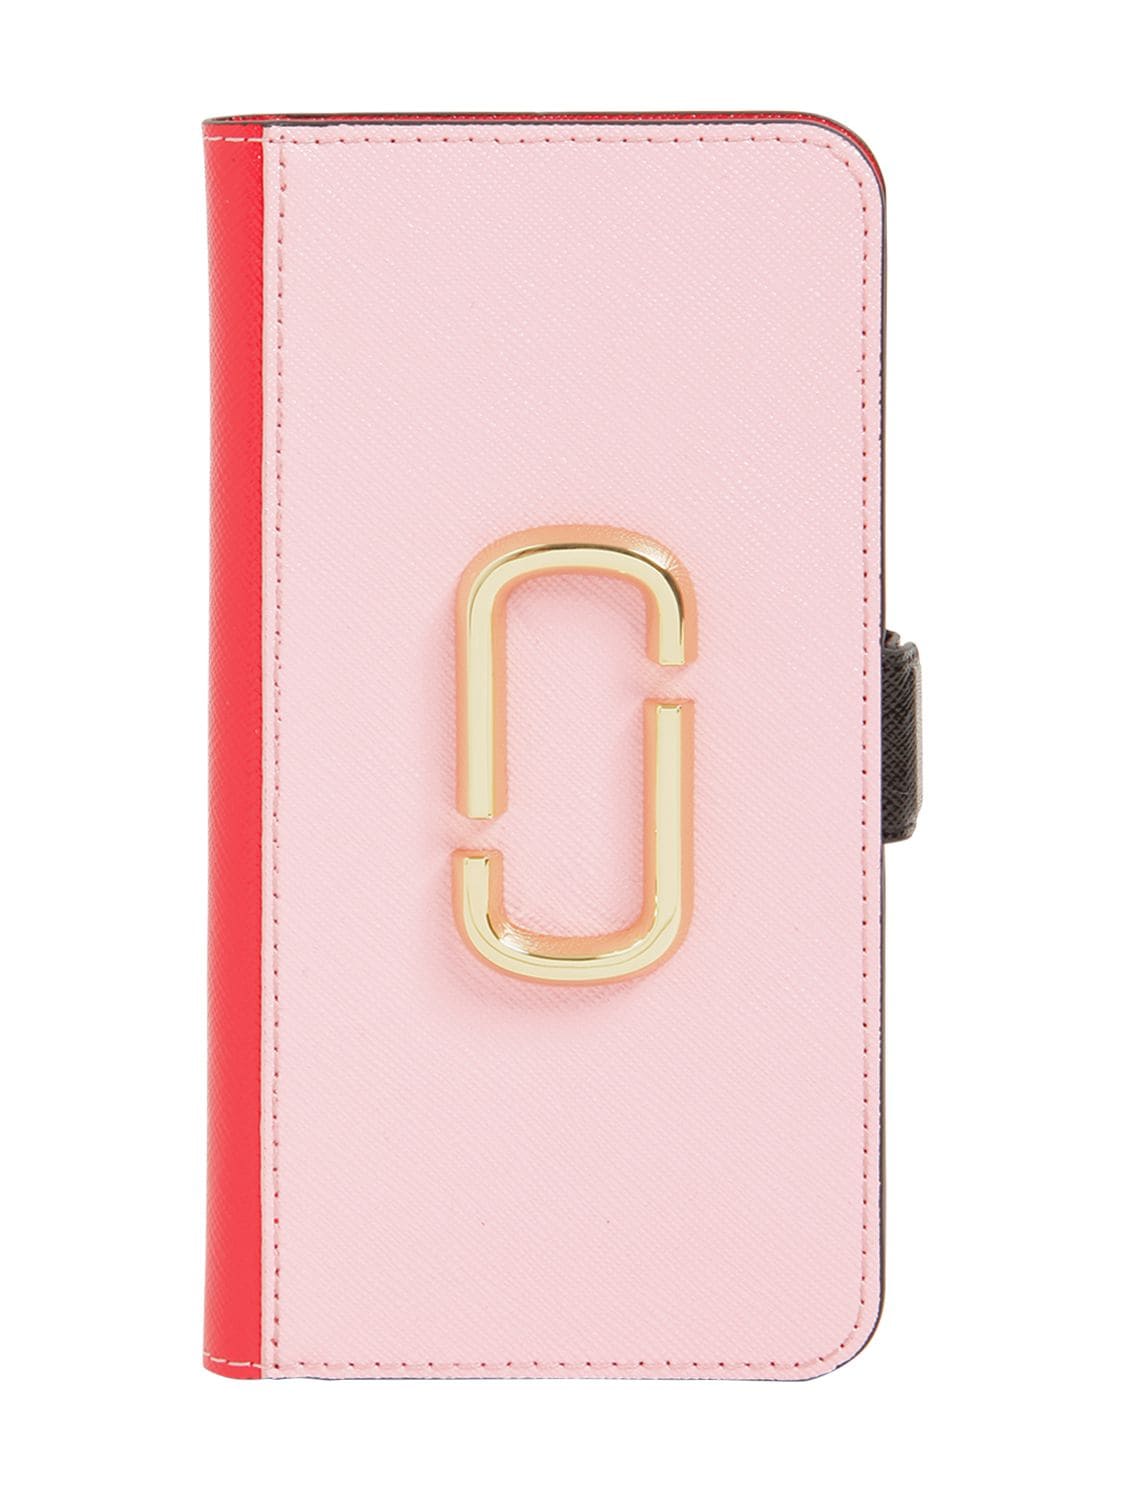 Marc Jacobs Grained Leather Iphone Xr Case In Tart Pink